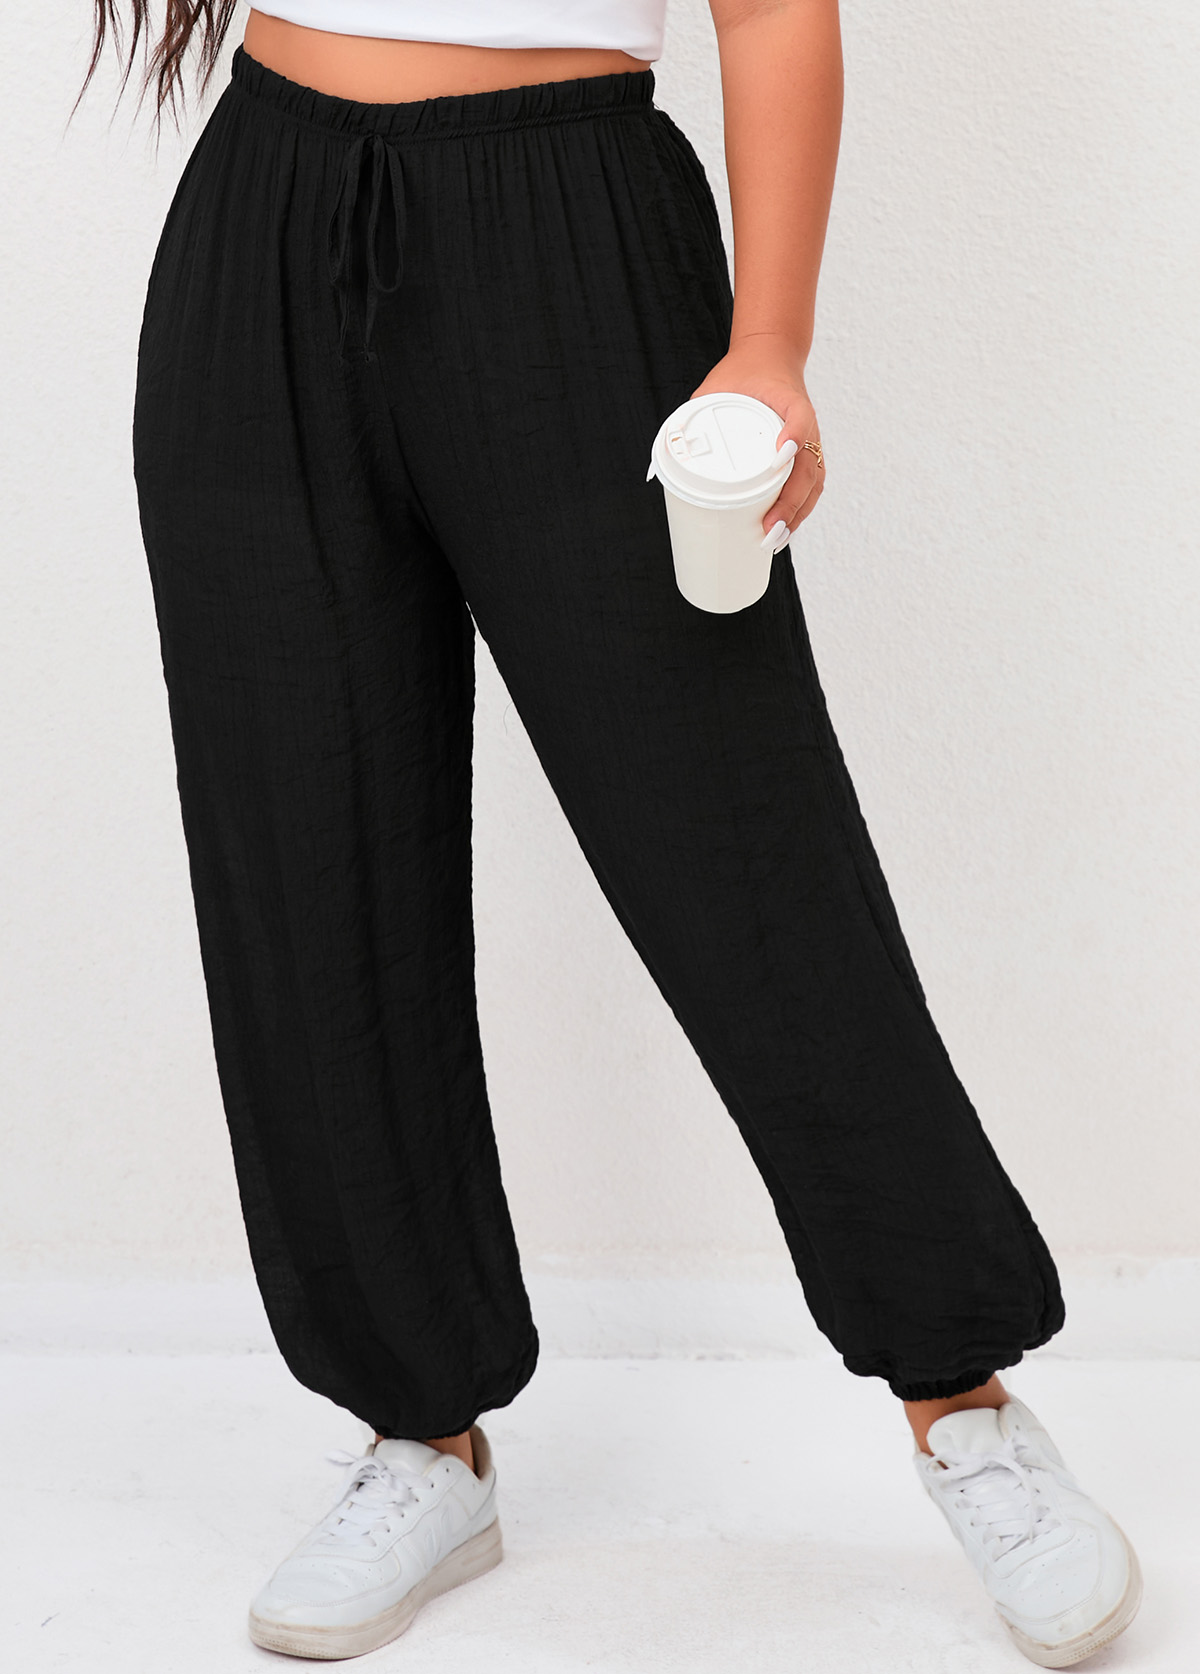 Black Tie Front Plus Size High Waisted Pants